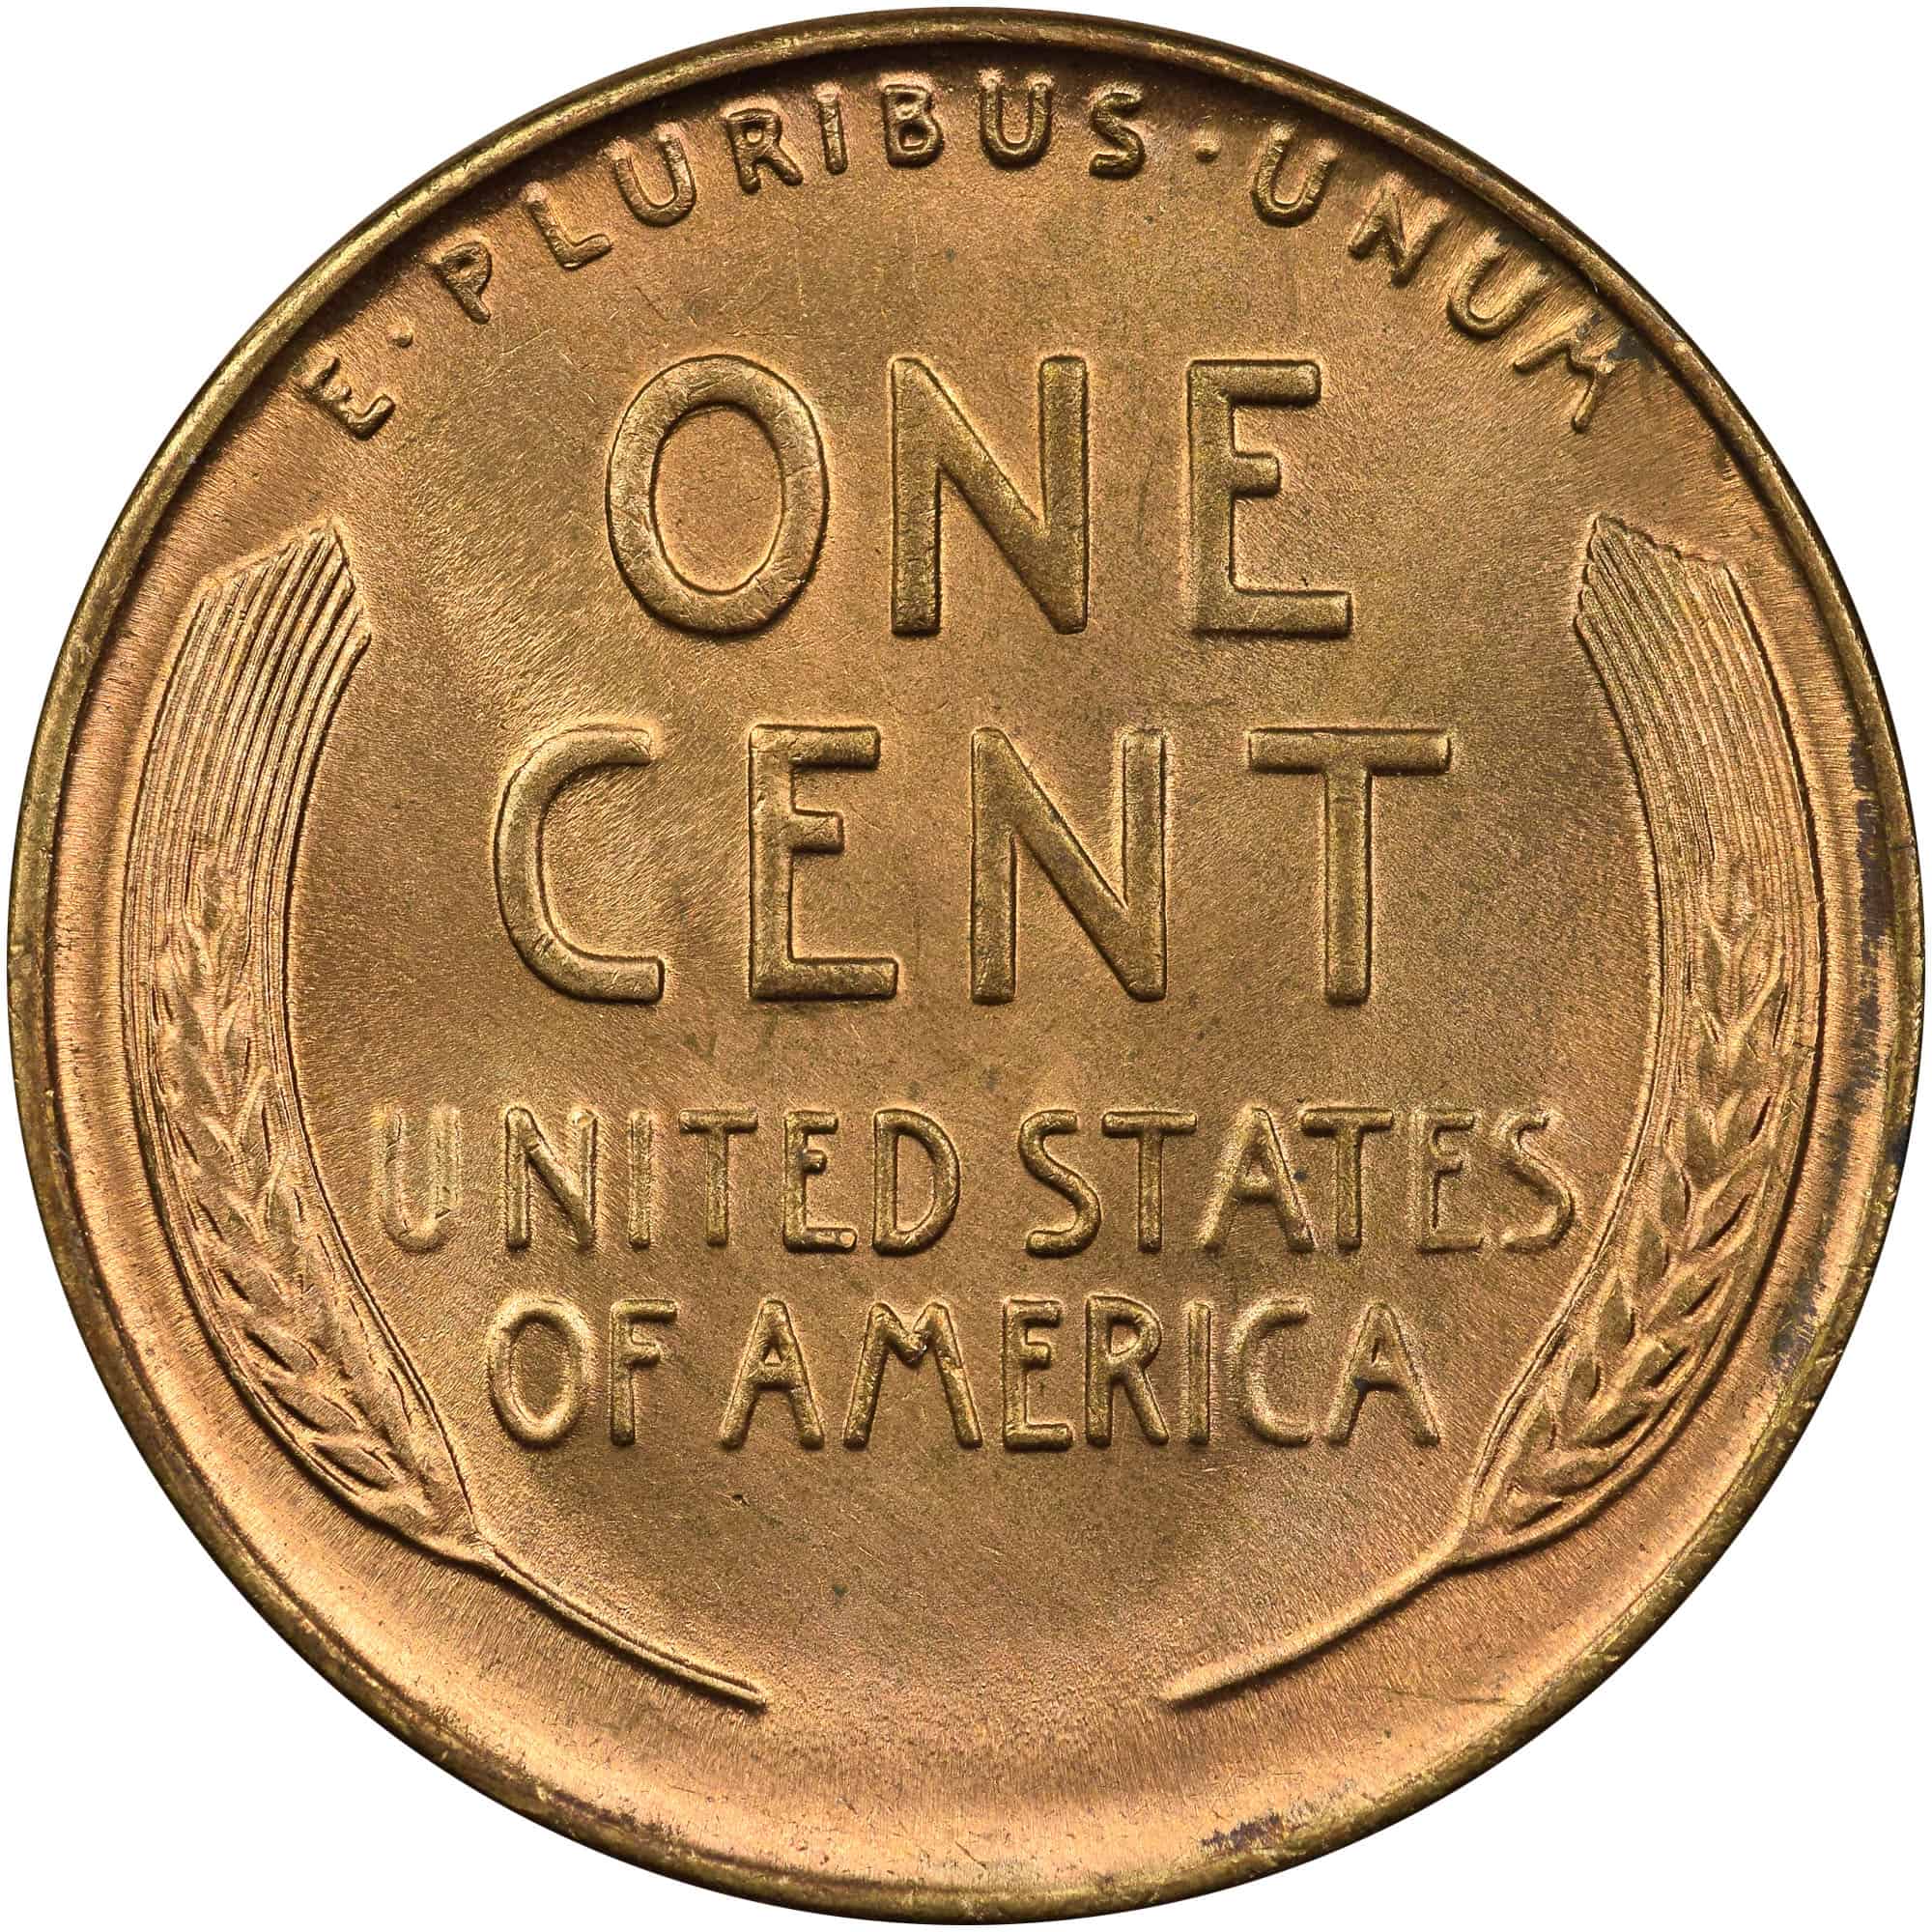 The reverse of the 1938 Lincoln cent